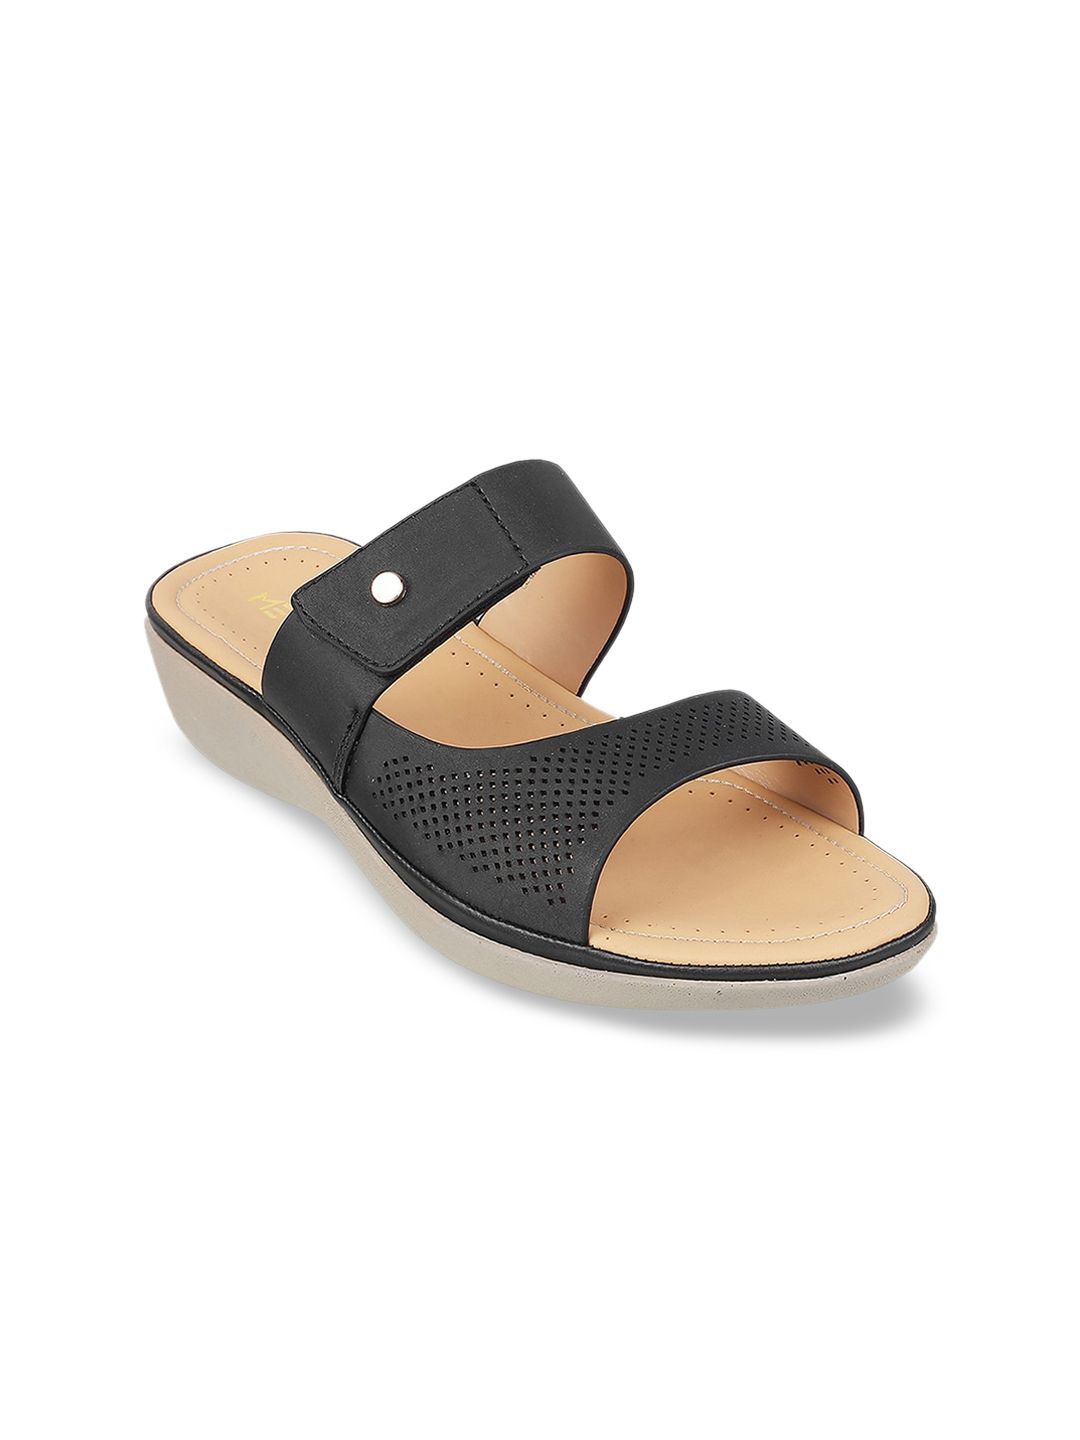 Metro Black Textured Wedge Sandals with Laser Cuts Price in India